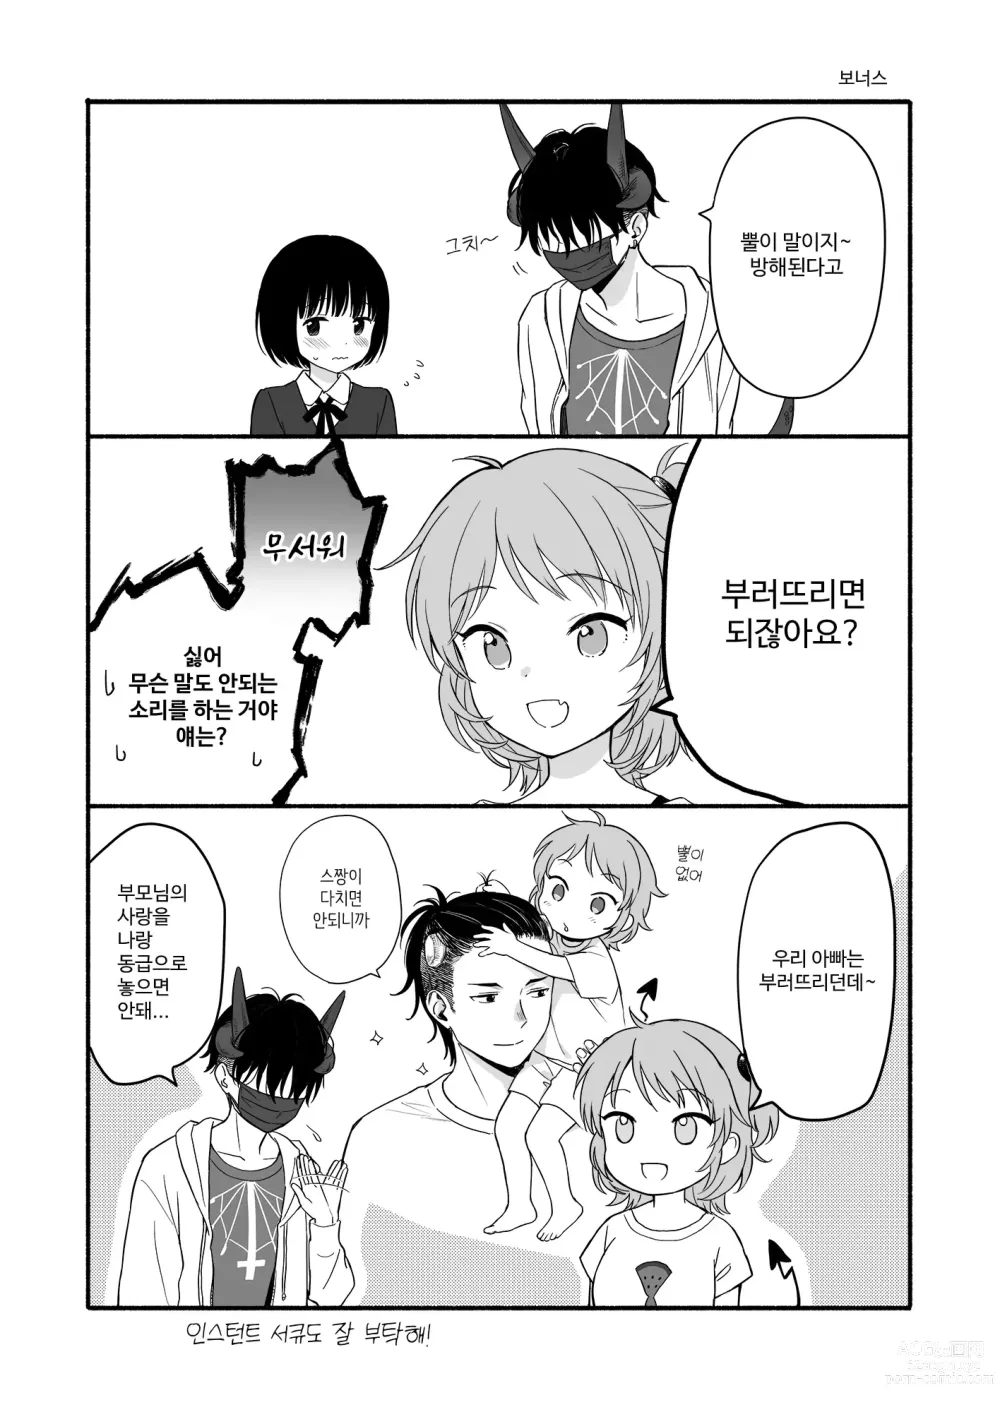 Page 39 of doujinshi 심야의 침입자